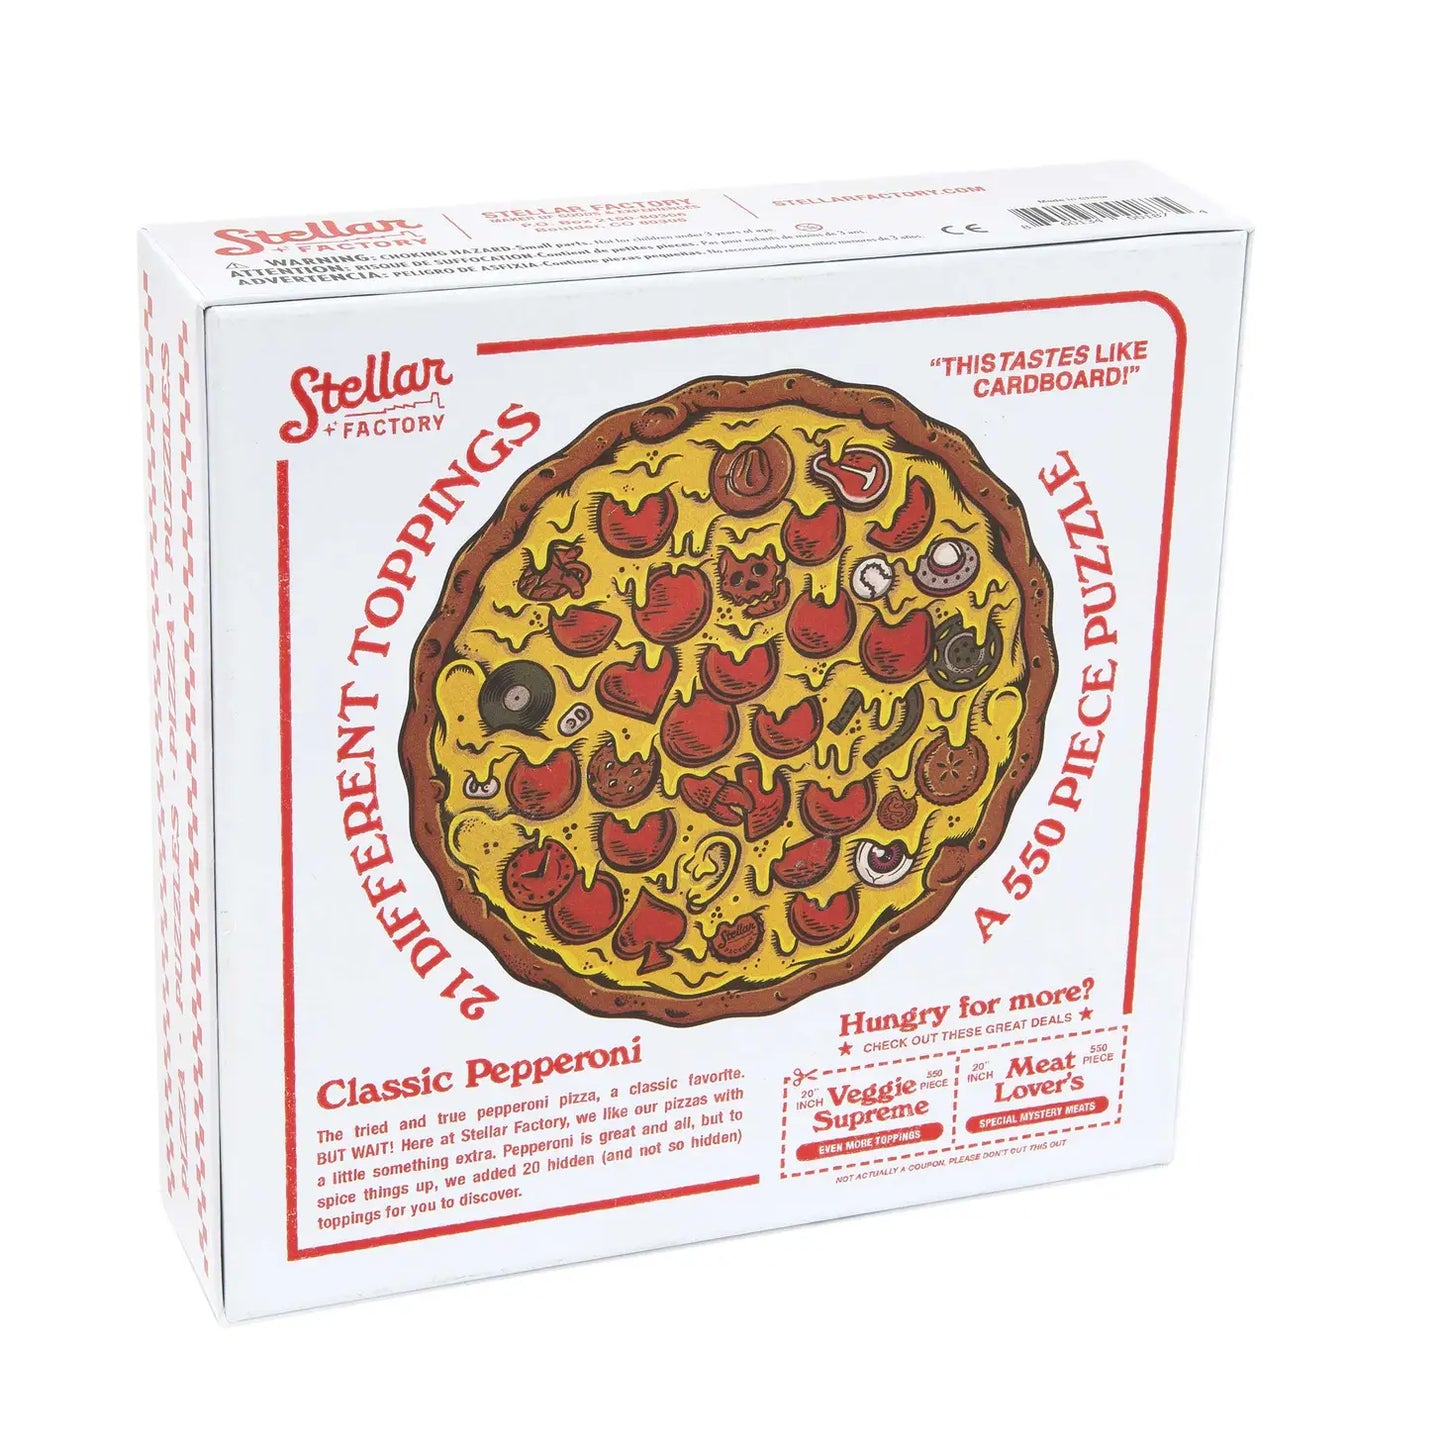 Pizza Puzzles: Pepperoni